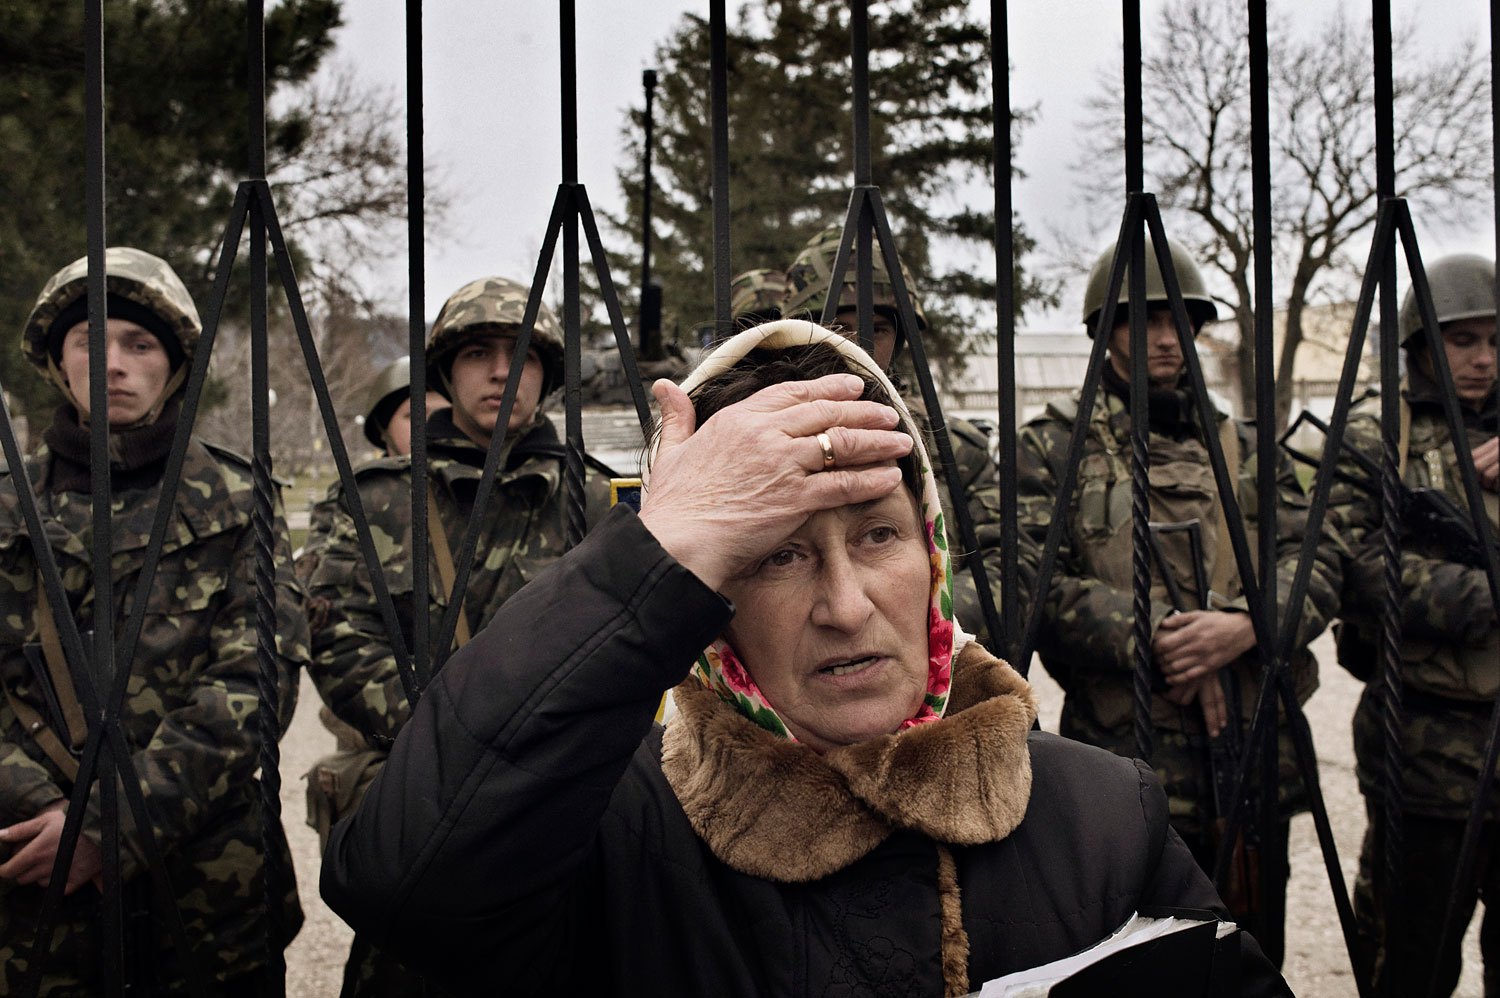 A Ukrainian woman reacts as troops in unmarked uniforms hold positions in Perevalnoye, a small Ukrainian base roughly 15 miles south of Simferopol on Sunday, March 2, 2014. About two dozen Ukrainian soldiers could be seen behind her.